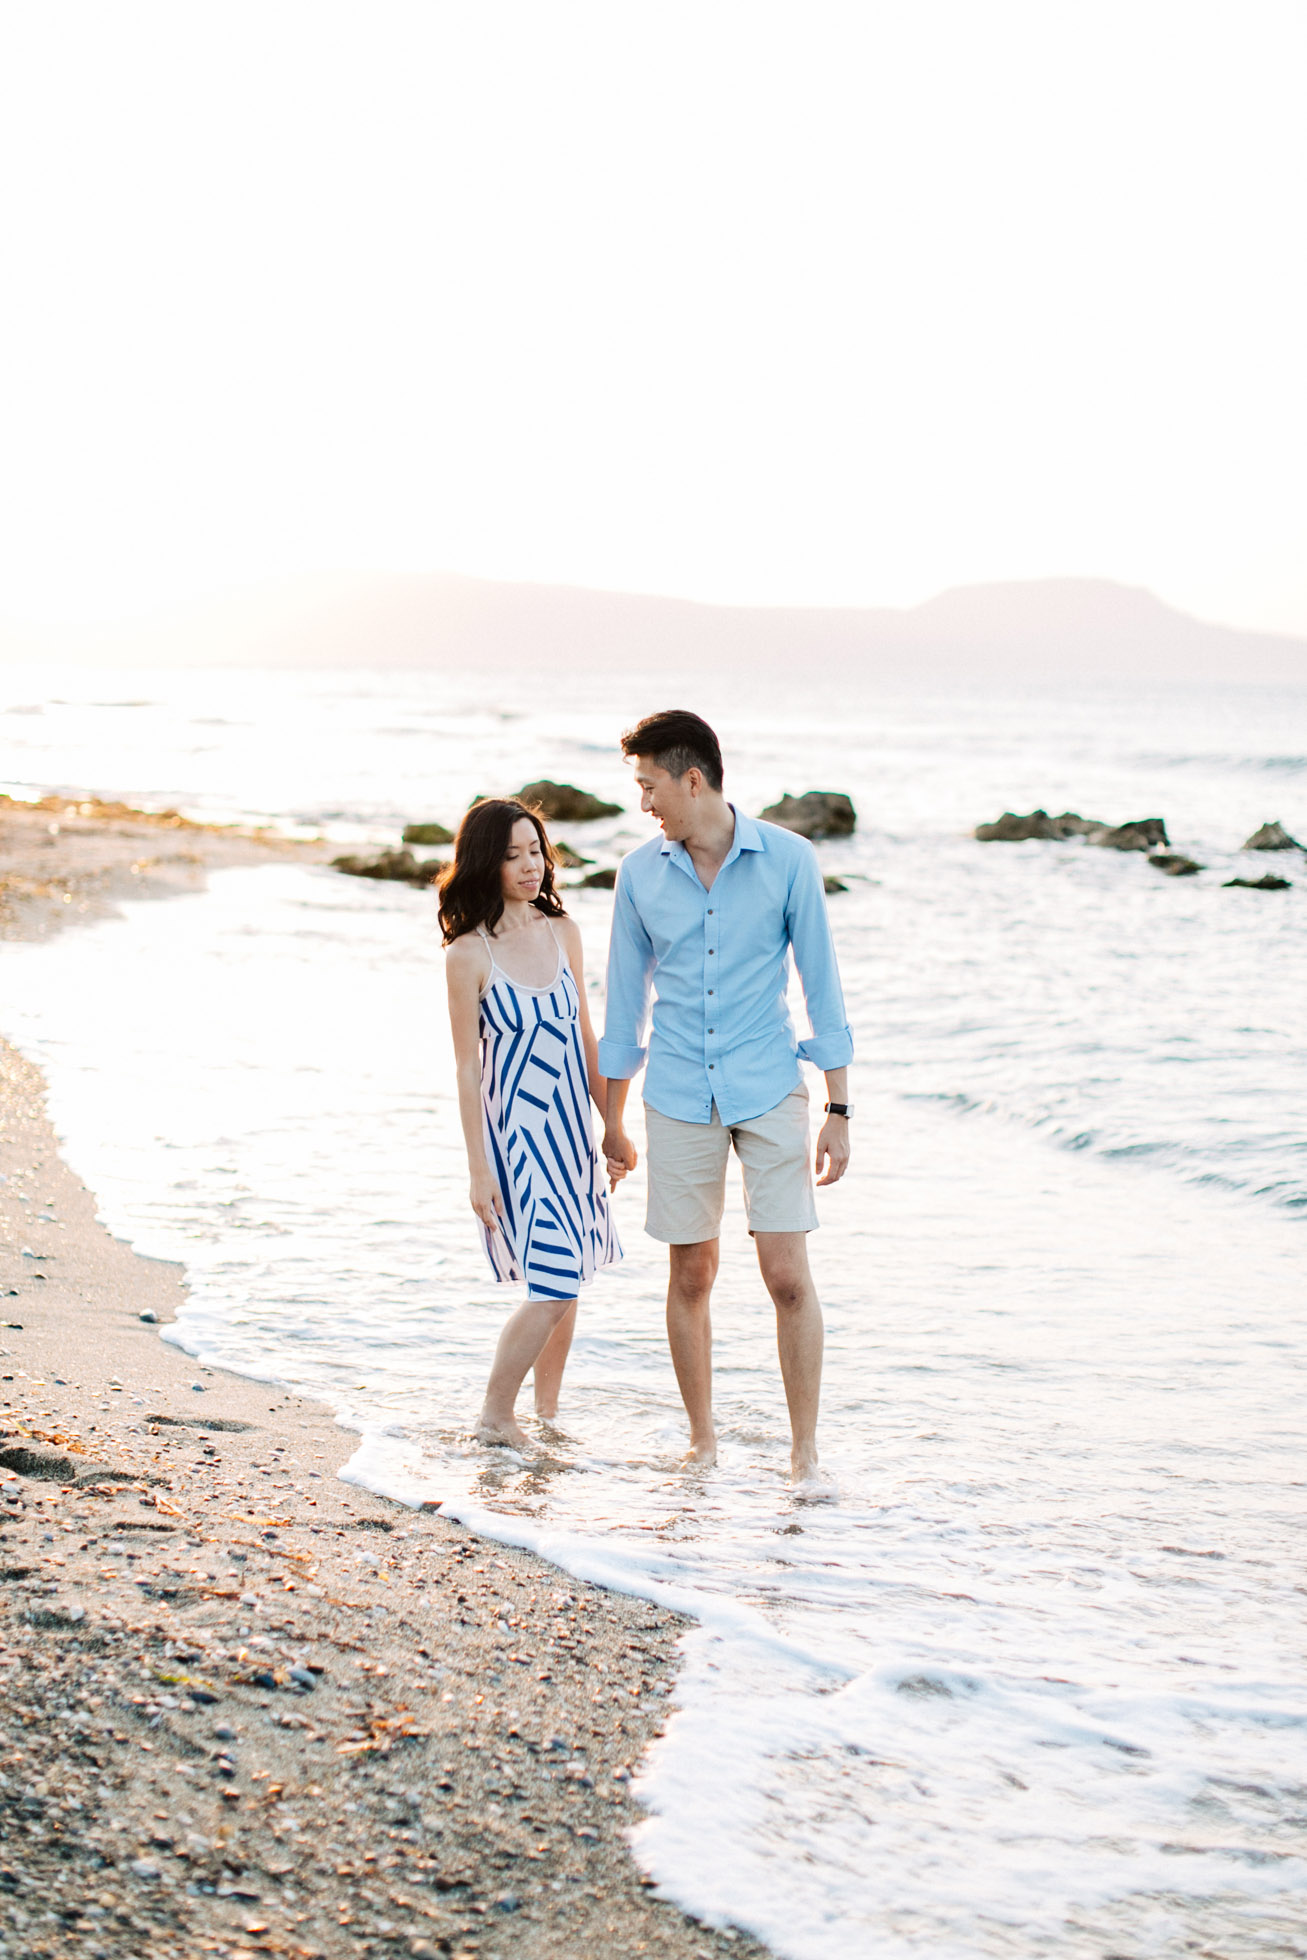 Happy international couple wearing summer clothing is posing for professional photographer team during their beach wedding photoshoot on the secluded shores of Rethymno town, Crete, Greece.